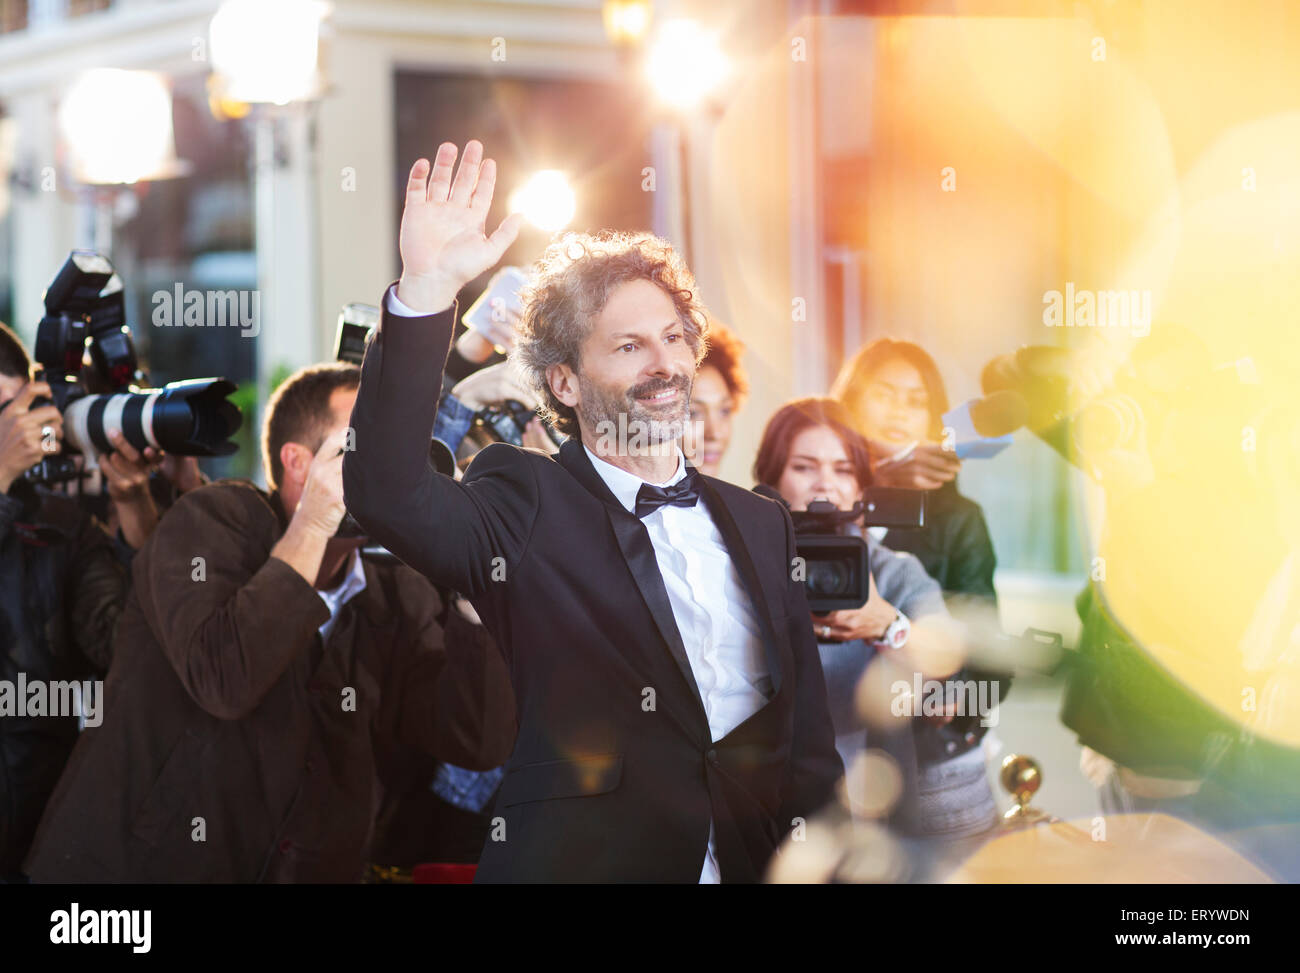 Celebrity waving for paparazzi at event Stock Photo